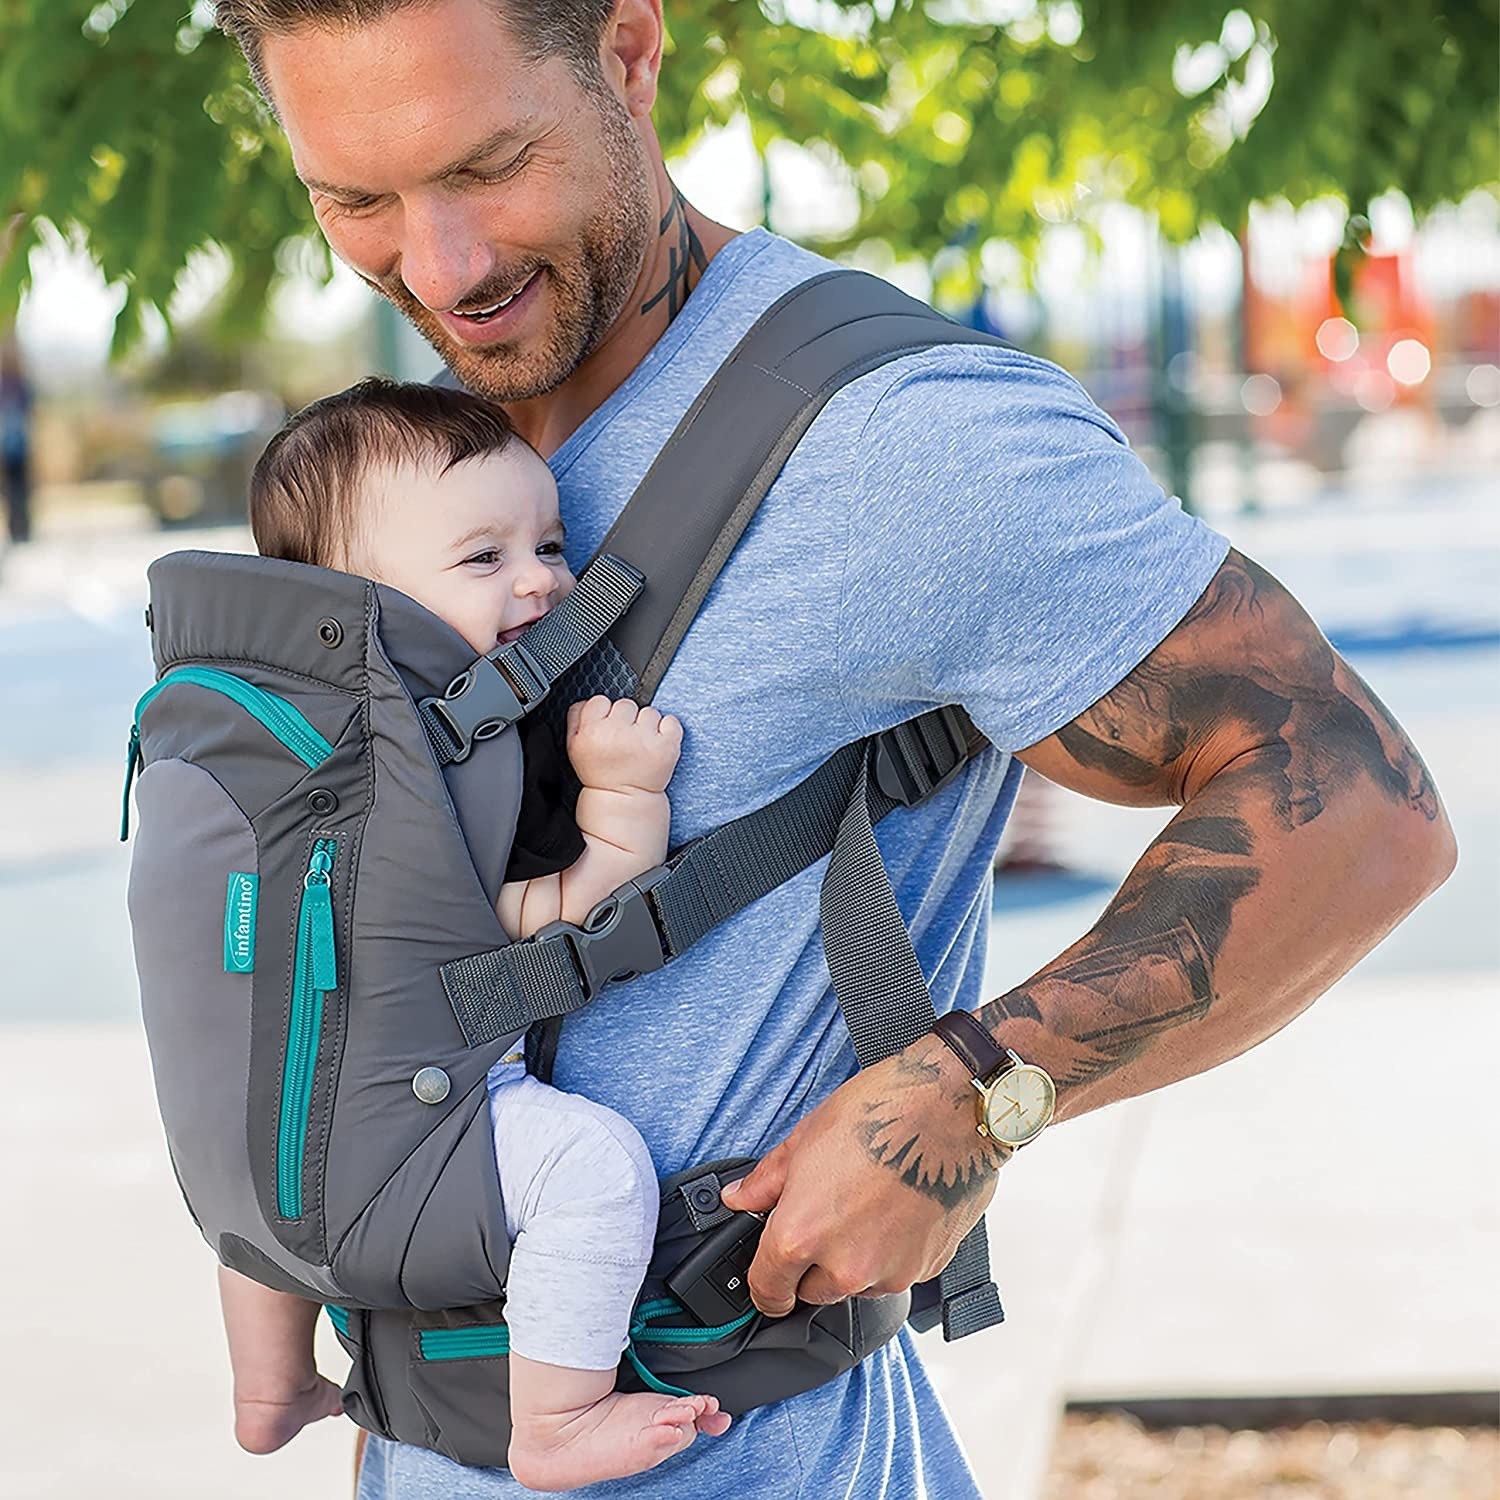 Man carrying baby in carrier